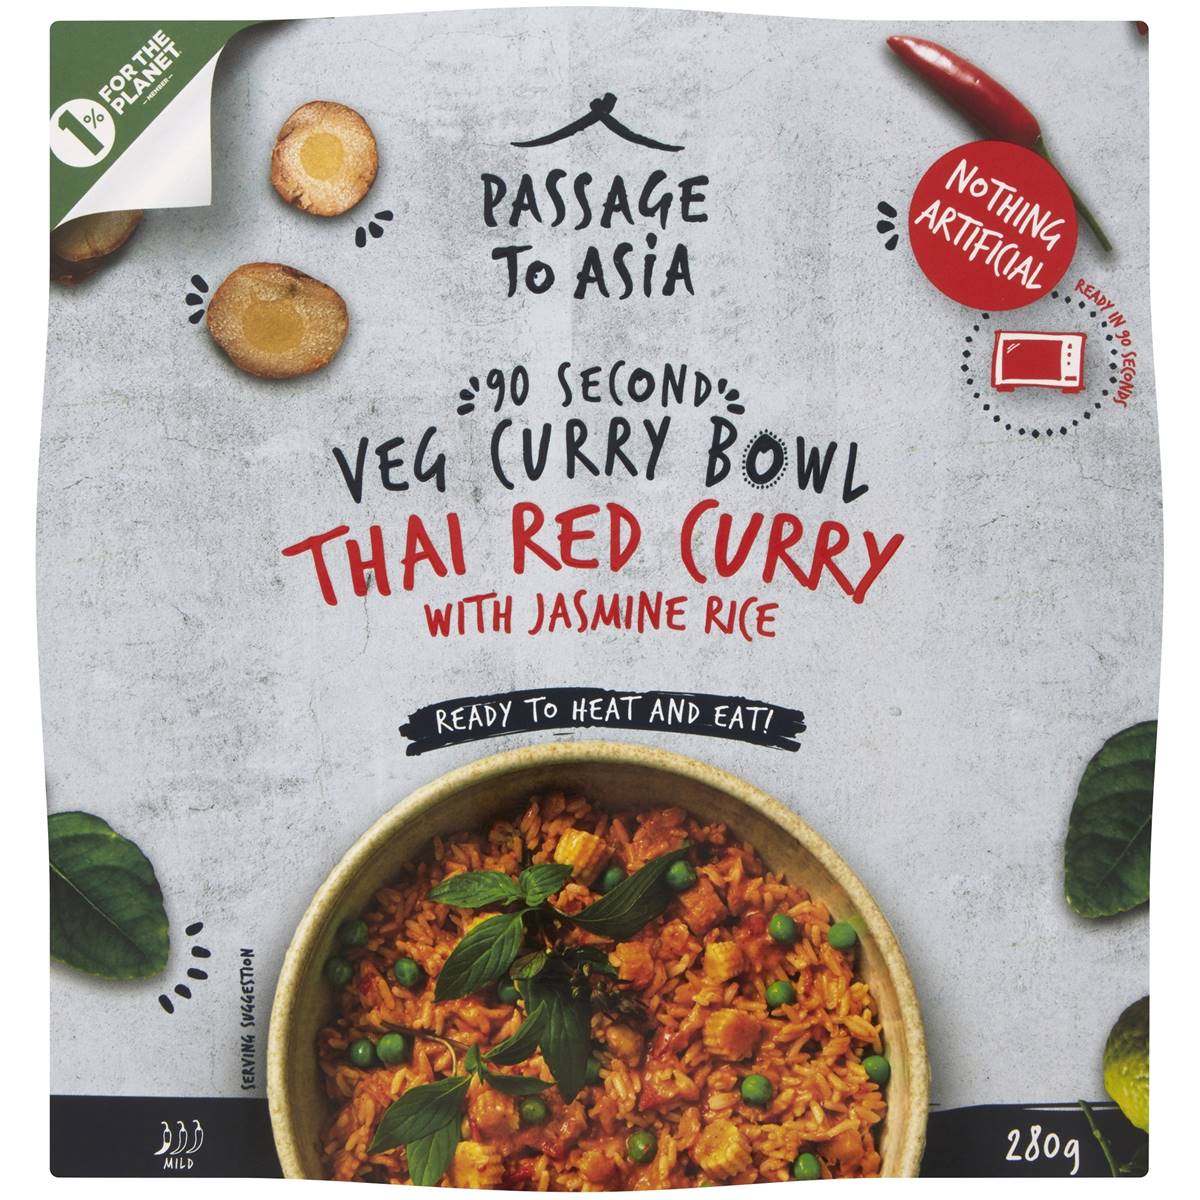 Calories in Passage To Asia Veg Curry Bowl Thai Red Curry With Jasmine Rice